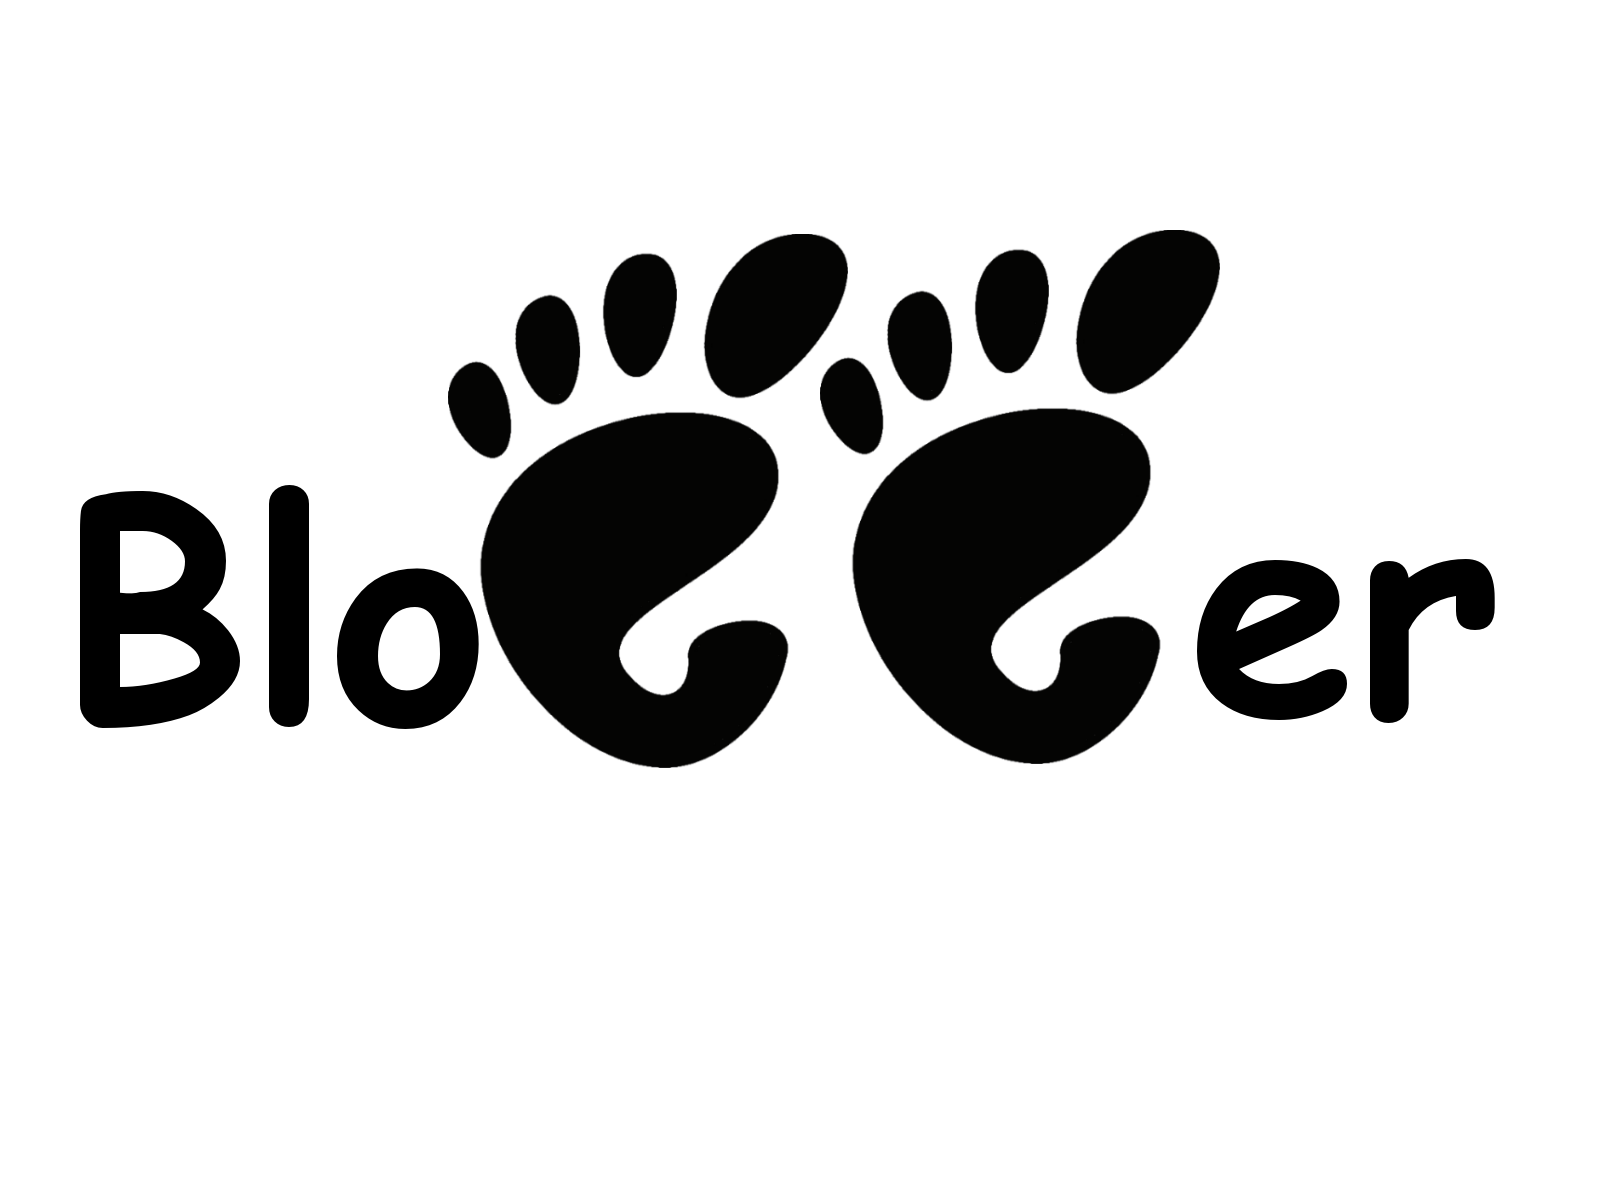 Blogger.png (1600×1200)